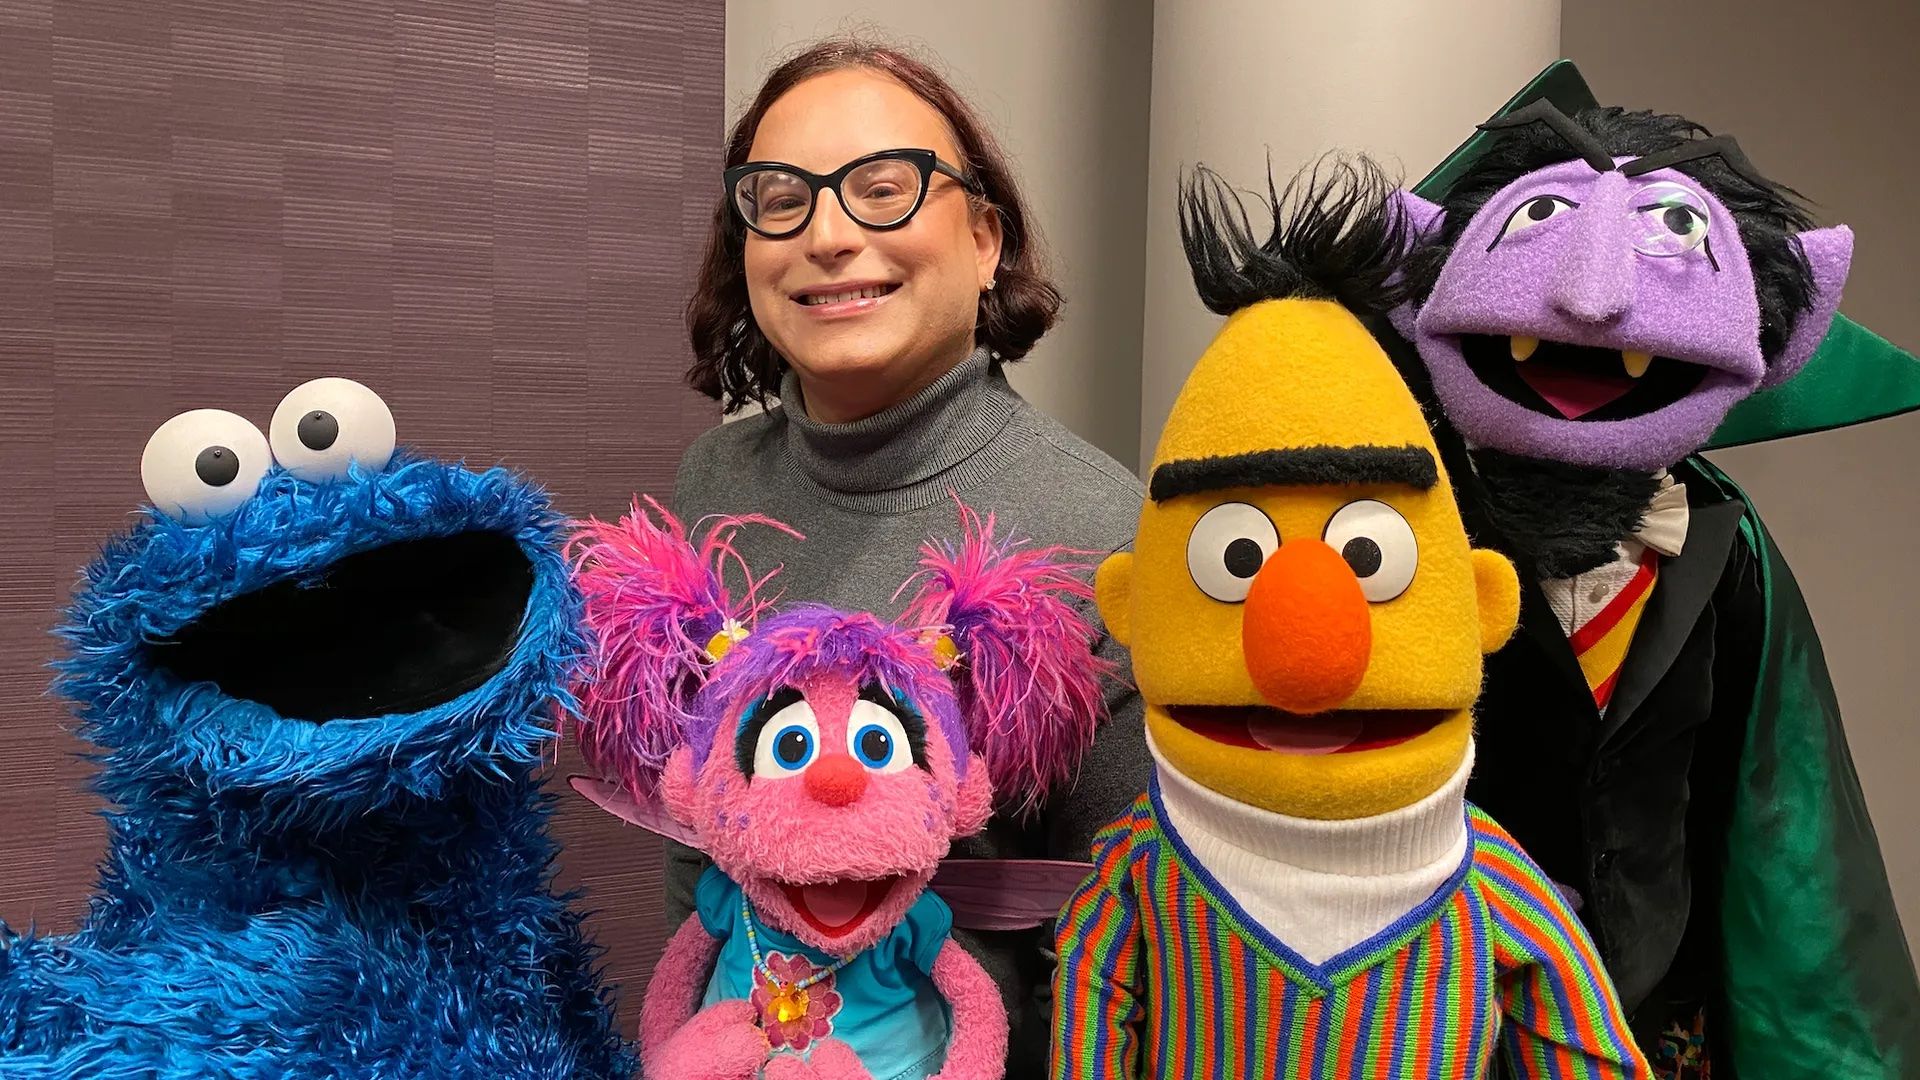 Axios' Ina Fried interviews Cookie Monster, Abby Cadabby, Bert and Count von Count